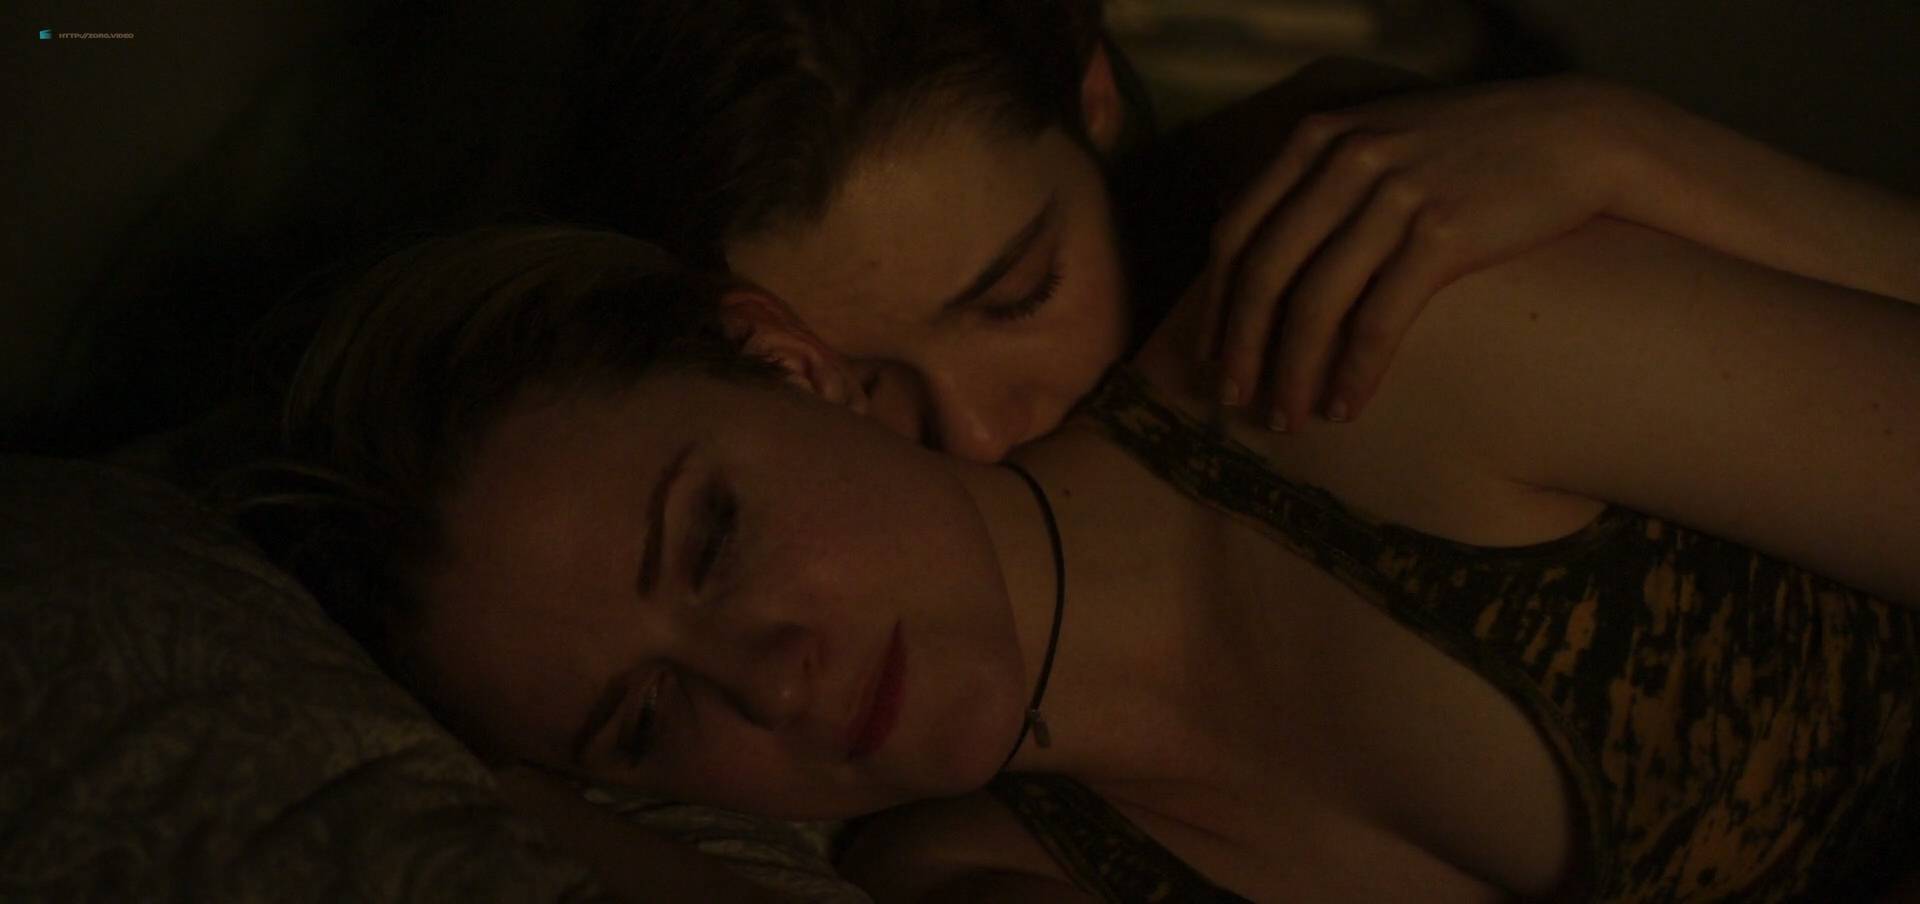 Evan-Rachel-Wood-nude-and-rough-sex-and-Julia-Sarah-Stone-hot-in-scenes-All...